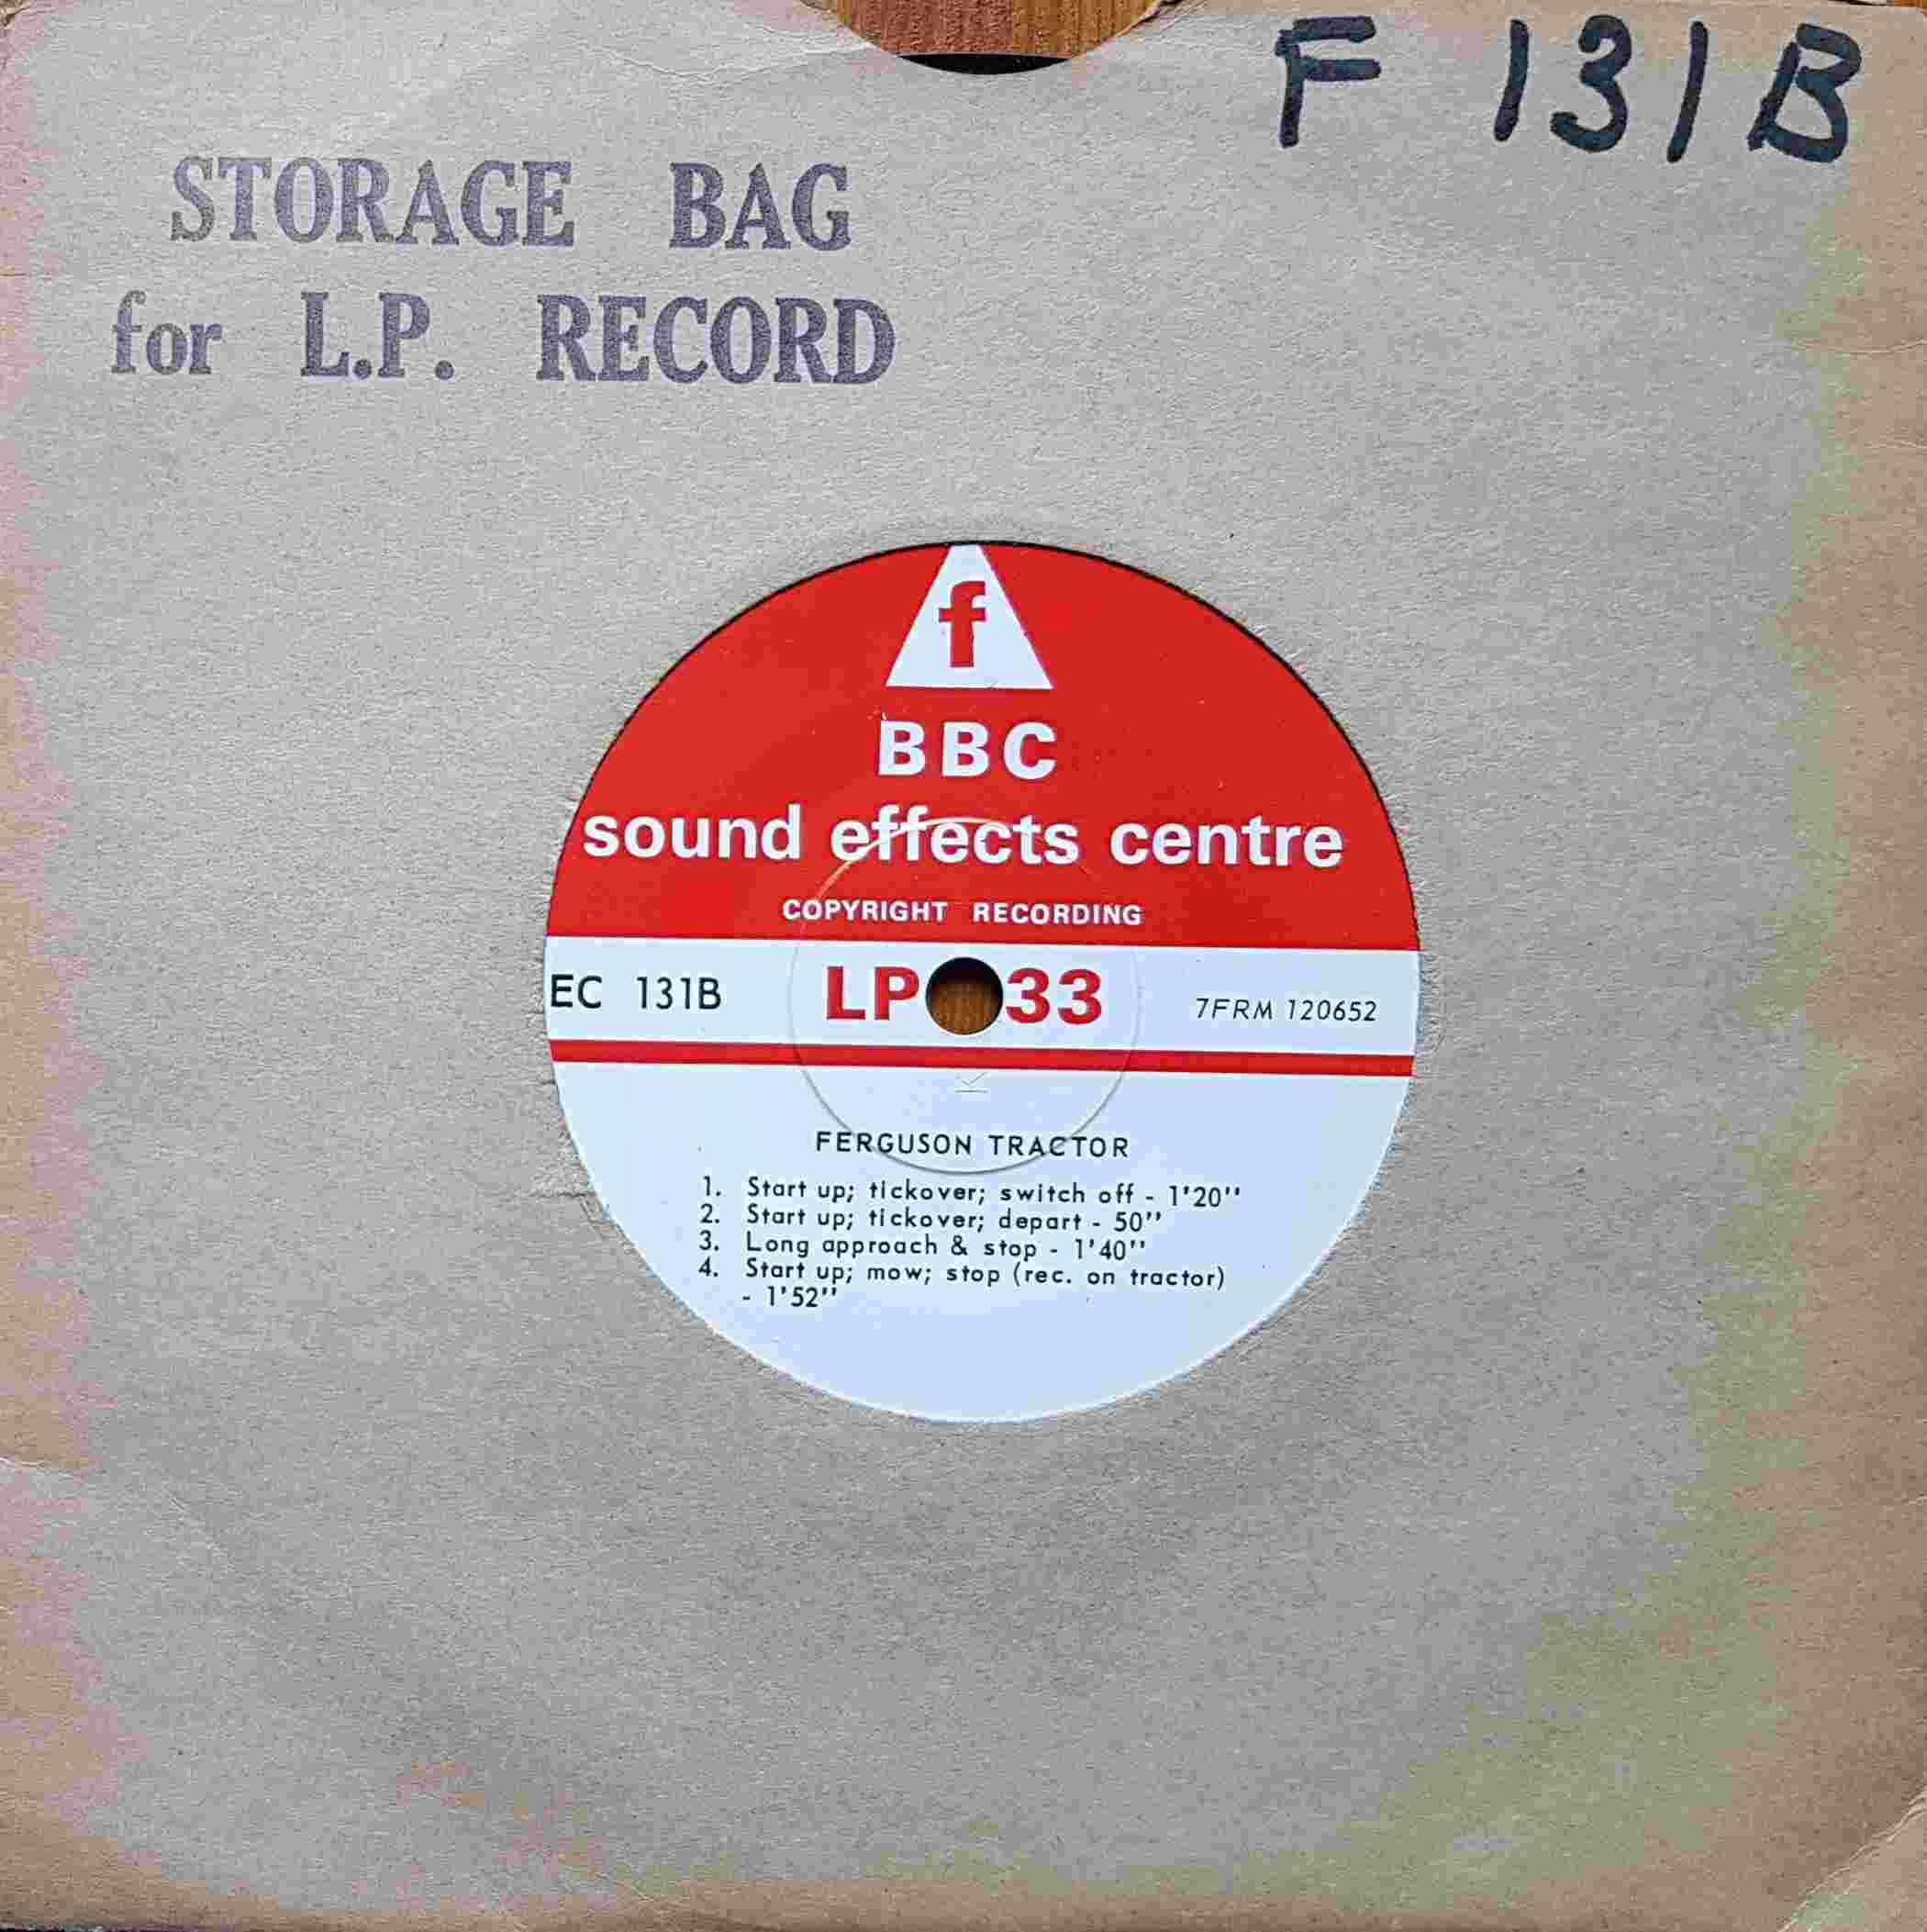 Picture of EC 131B Ferguson tractor by artist Not registered from the BBC singles - Records and Tapes library